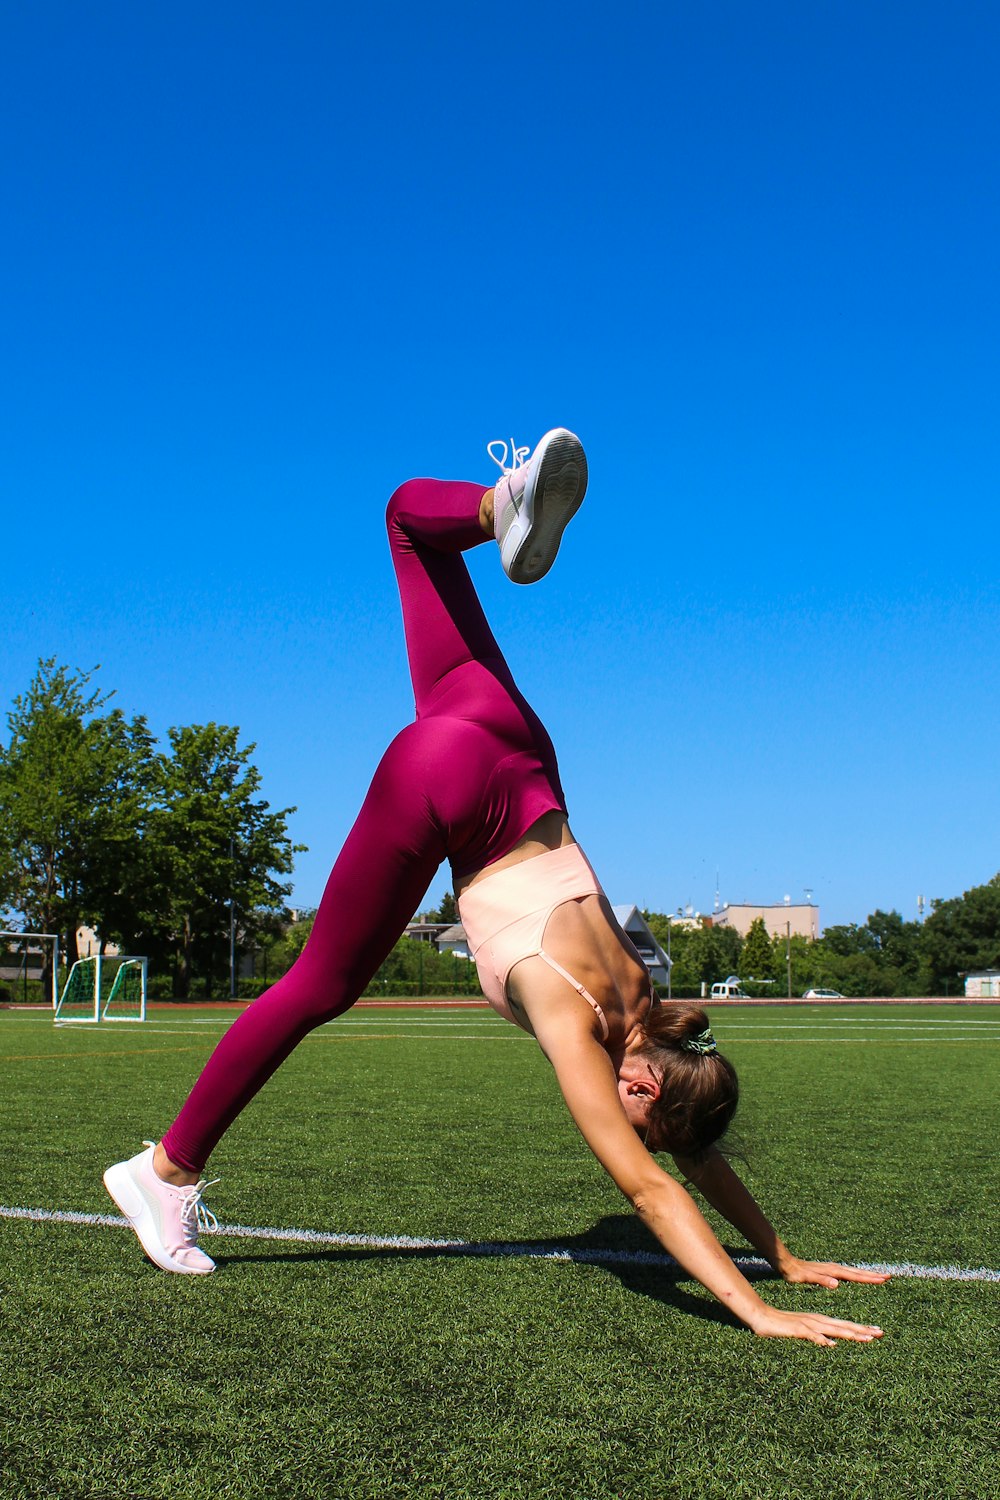 a woman doing a handstand on a soccer field